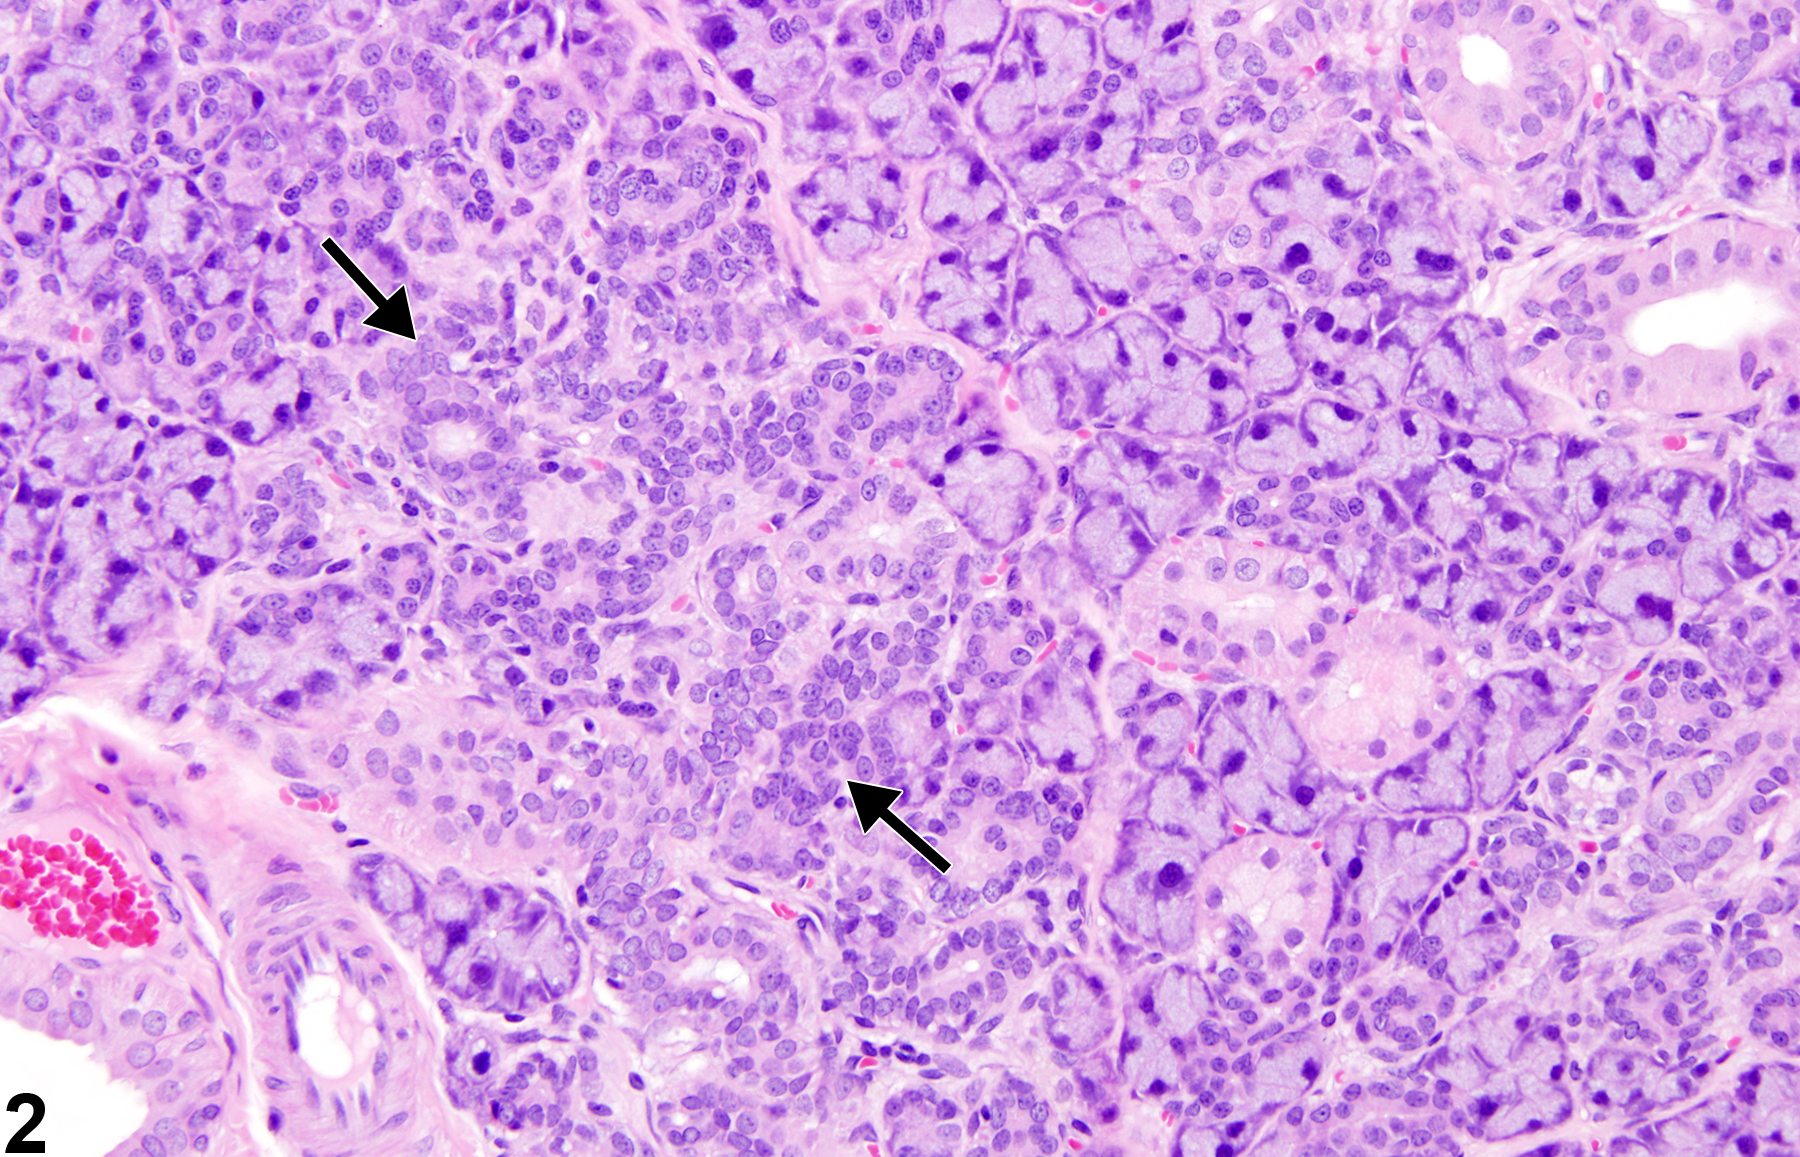 Image of hyperplasia in the salivary gland from a male F344/N rat in a subchronic study